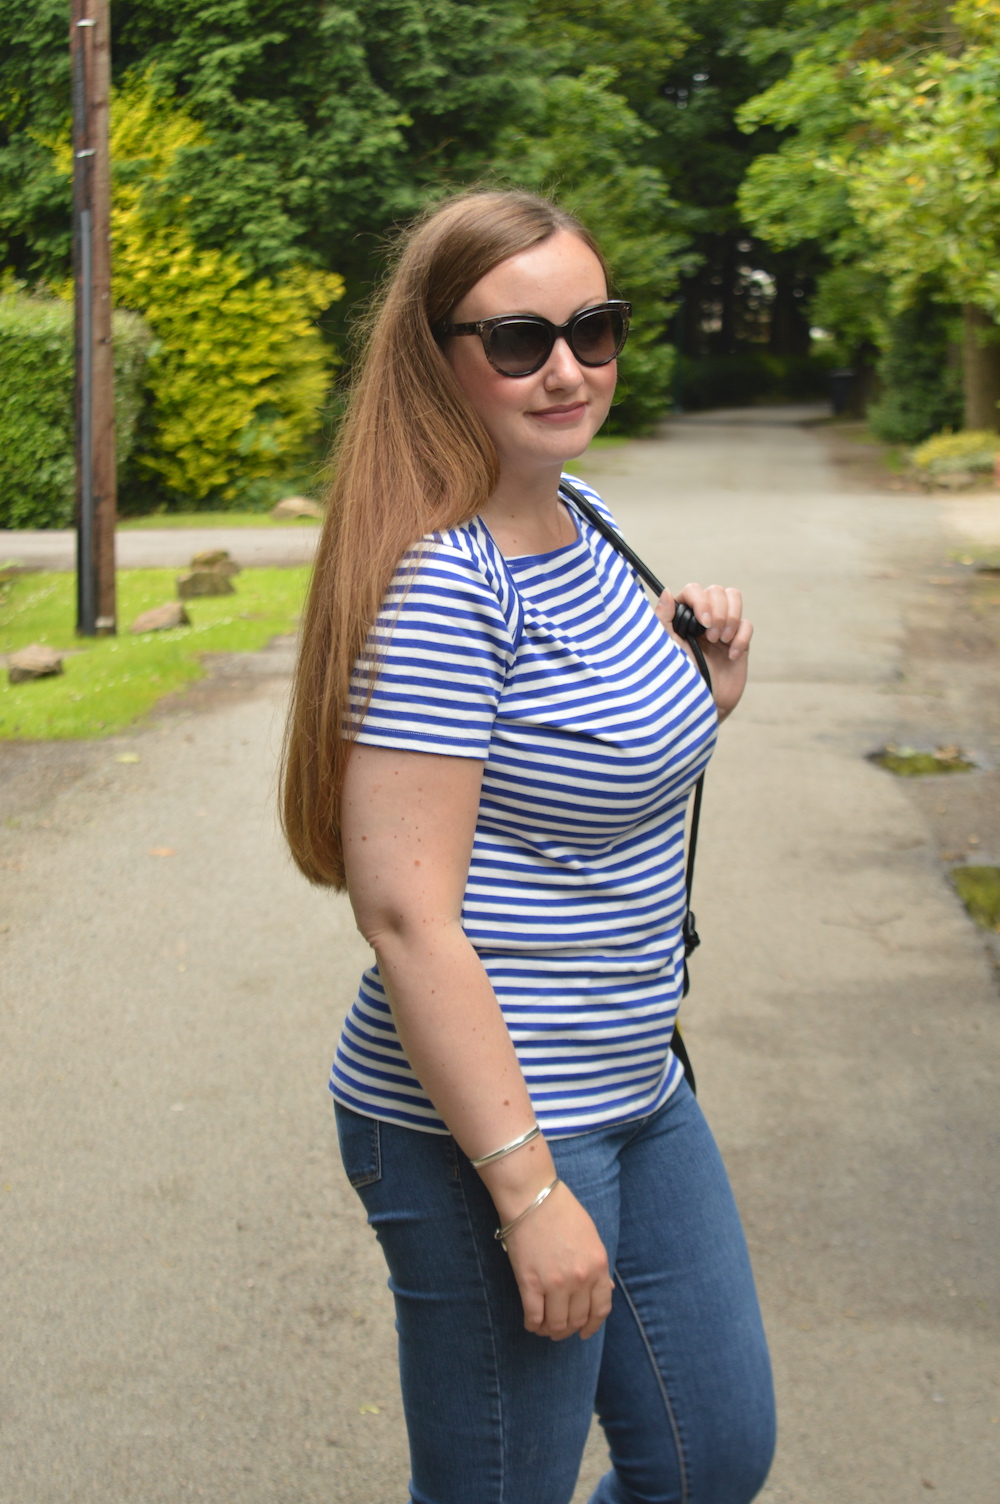 Petit bateau vogue inspired outfit